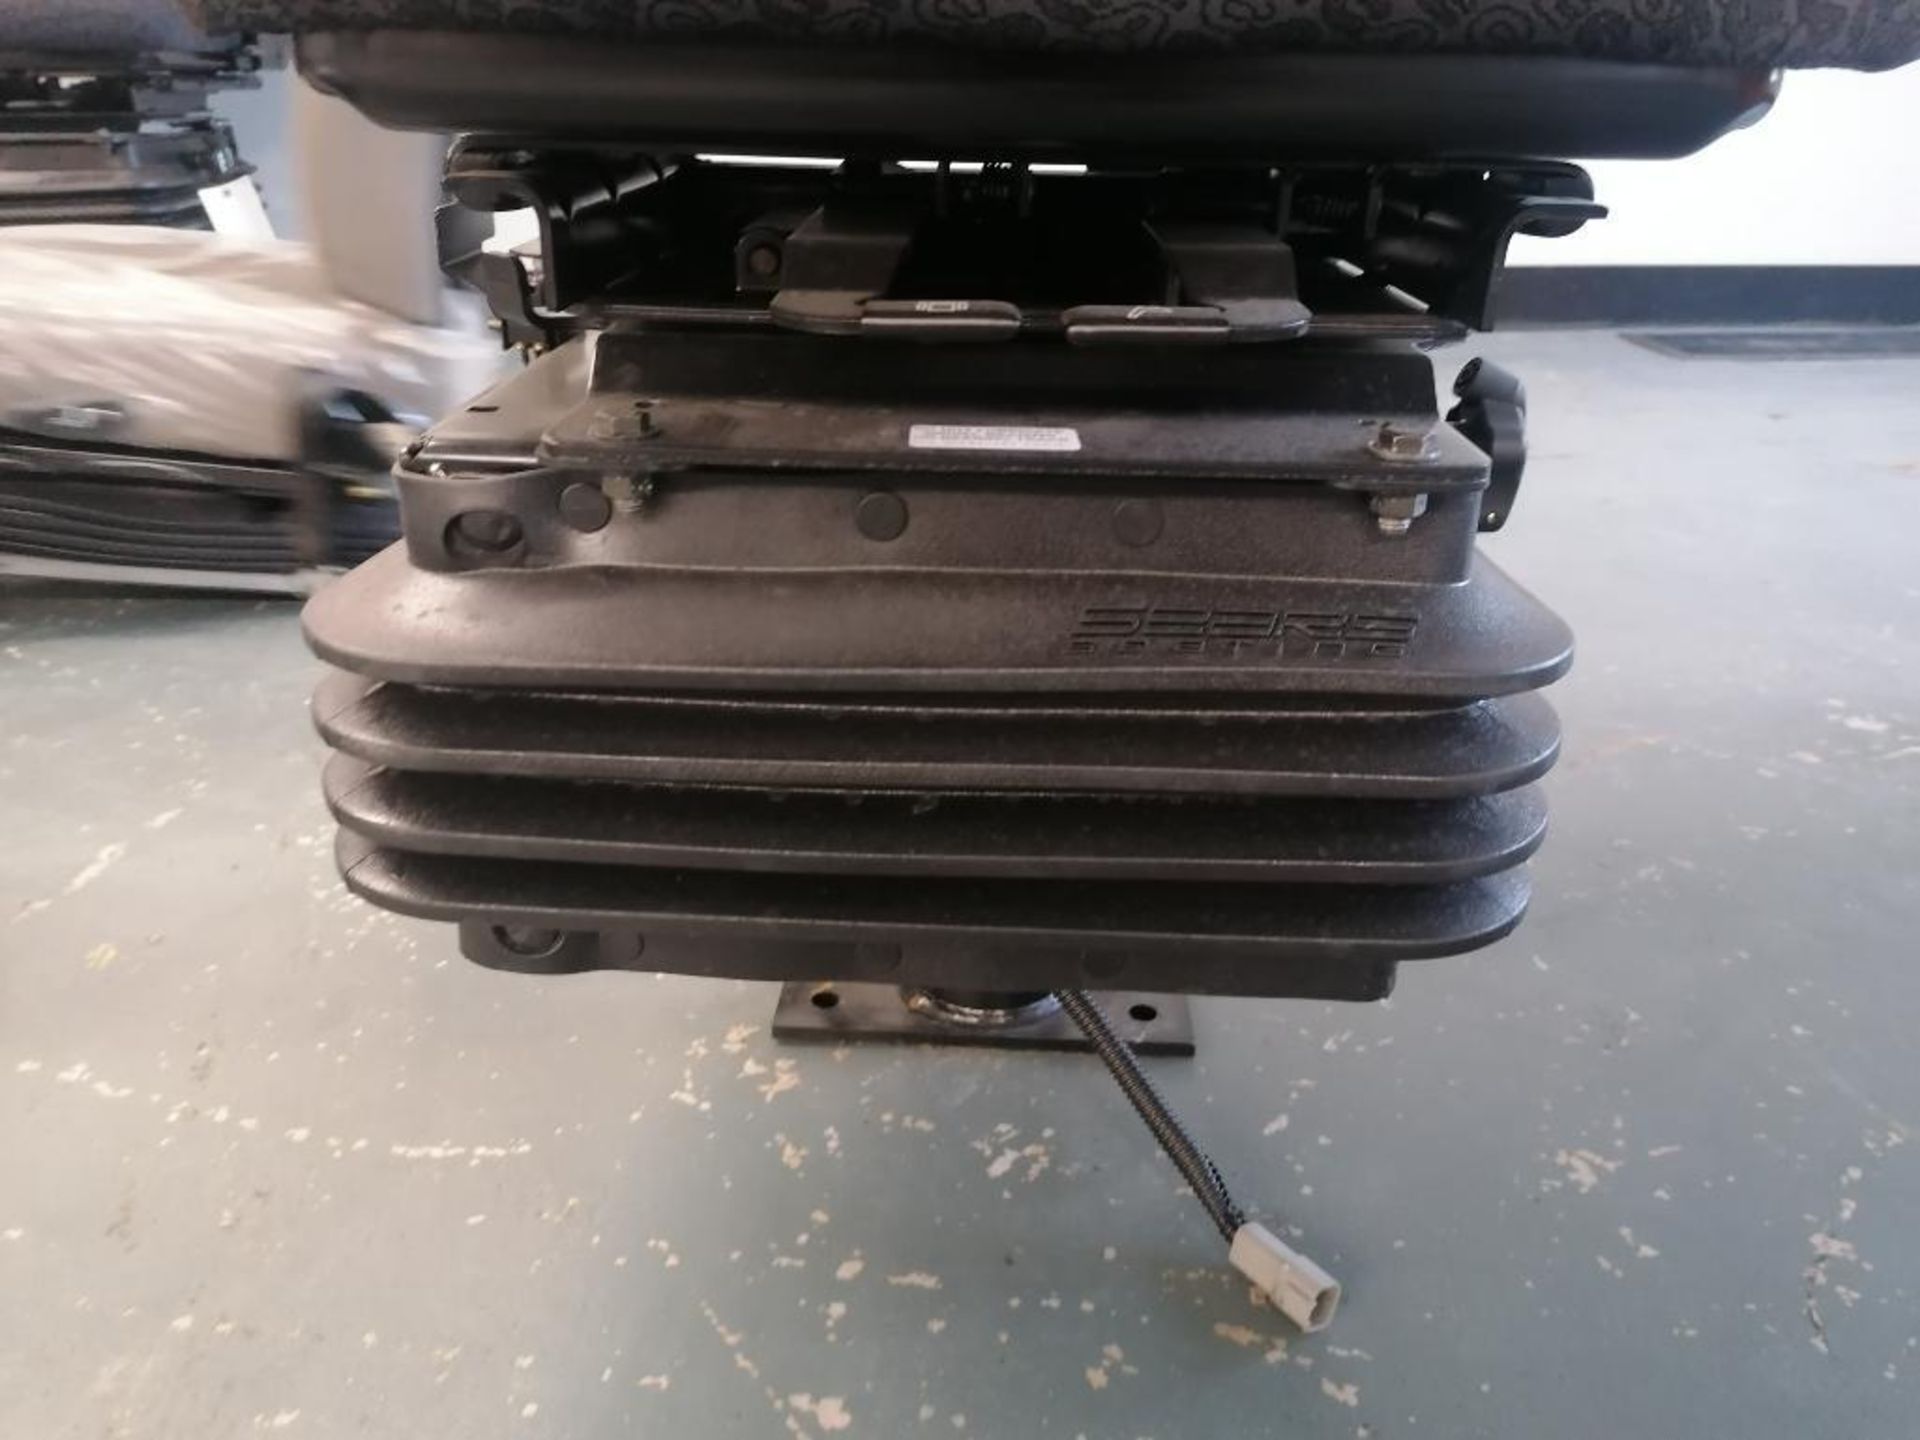 CNH Air Suspension Seat for Case Backhoe, Serial #007091742360. Located in Mt. Pleasant, IA. - Image 6 of 9